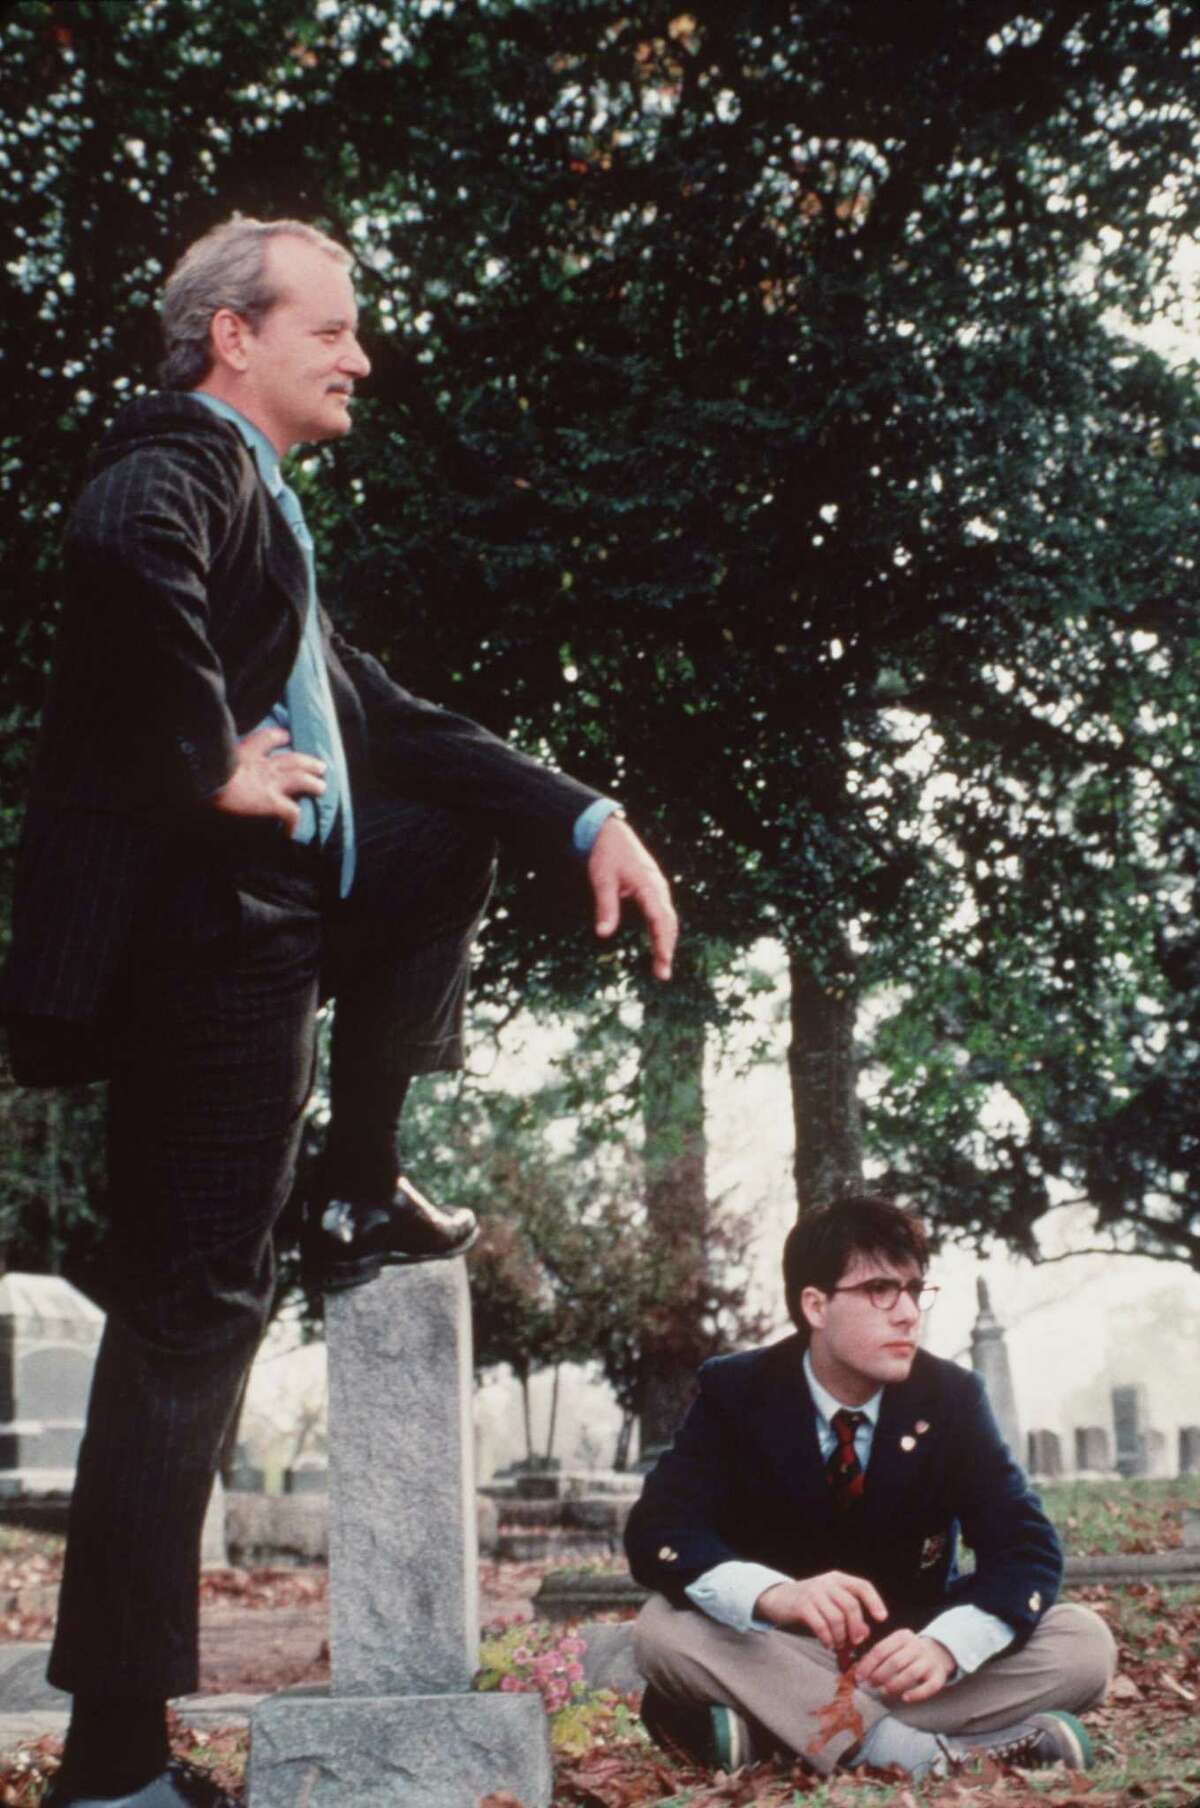 Hollywood Cemetery near Main and I-45 was used for a scene in “Rushmore” starring Bill Murray and Jason Schwartzman